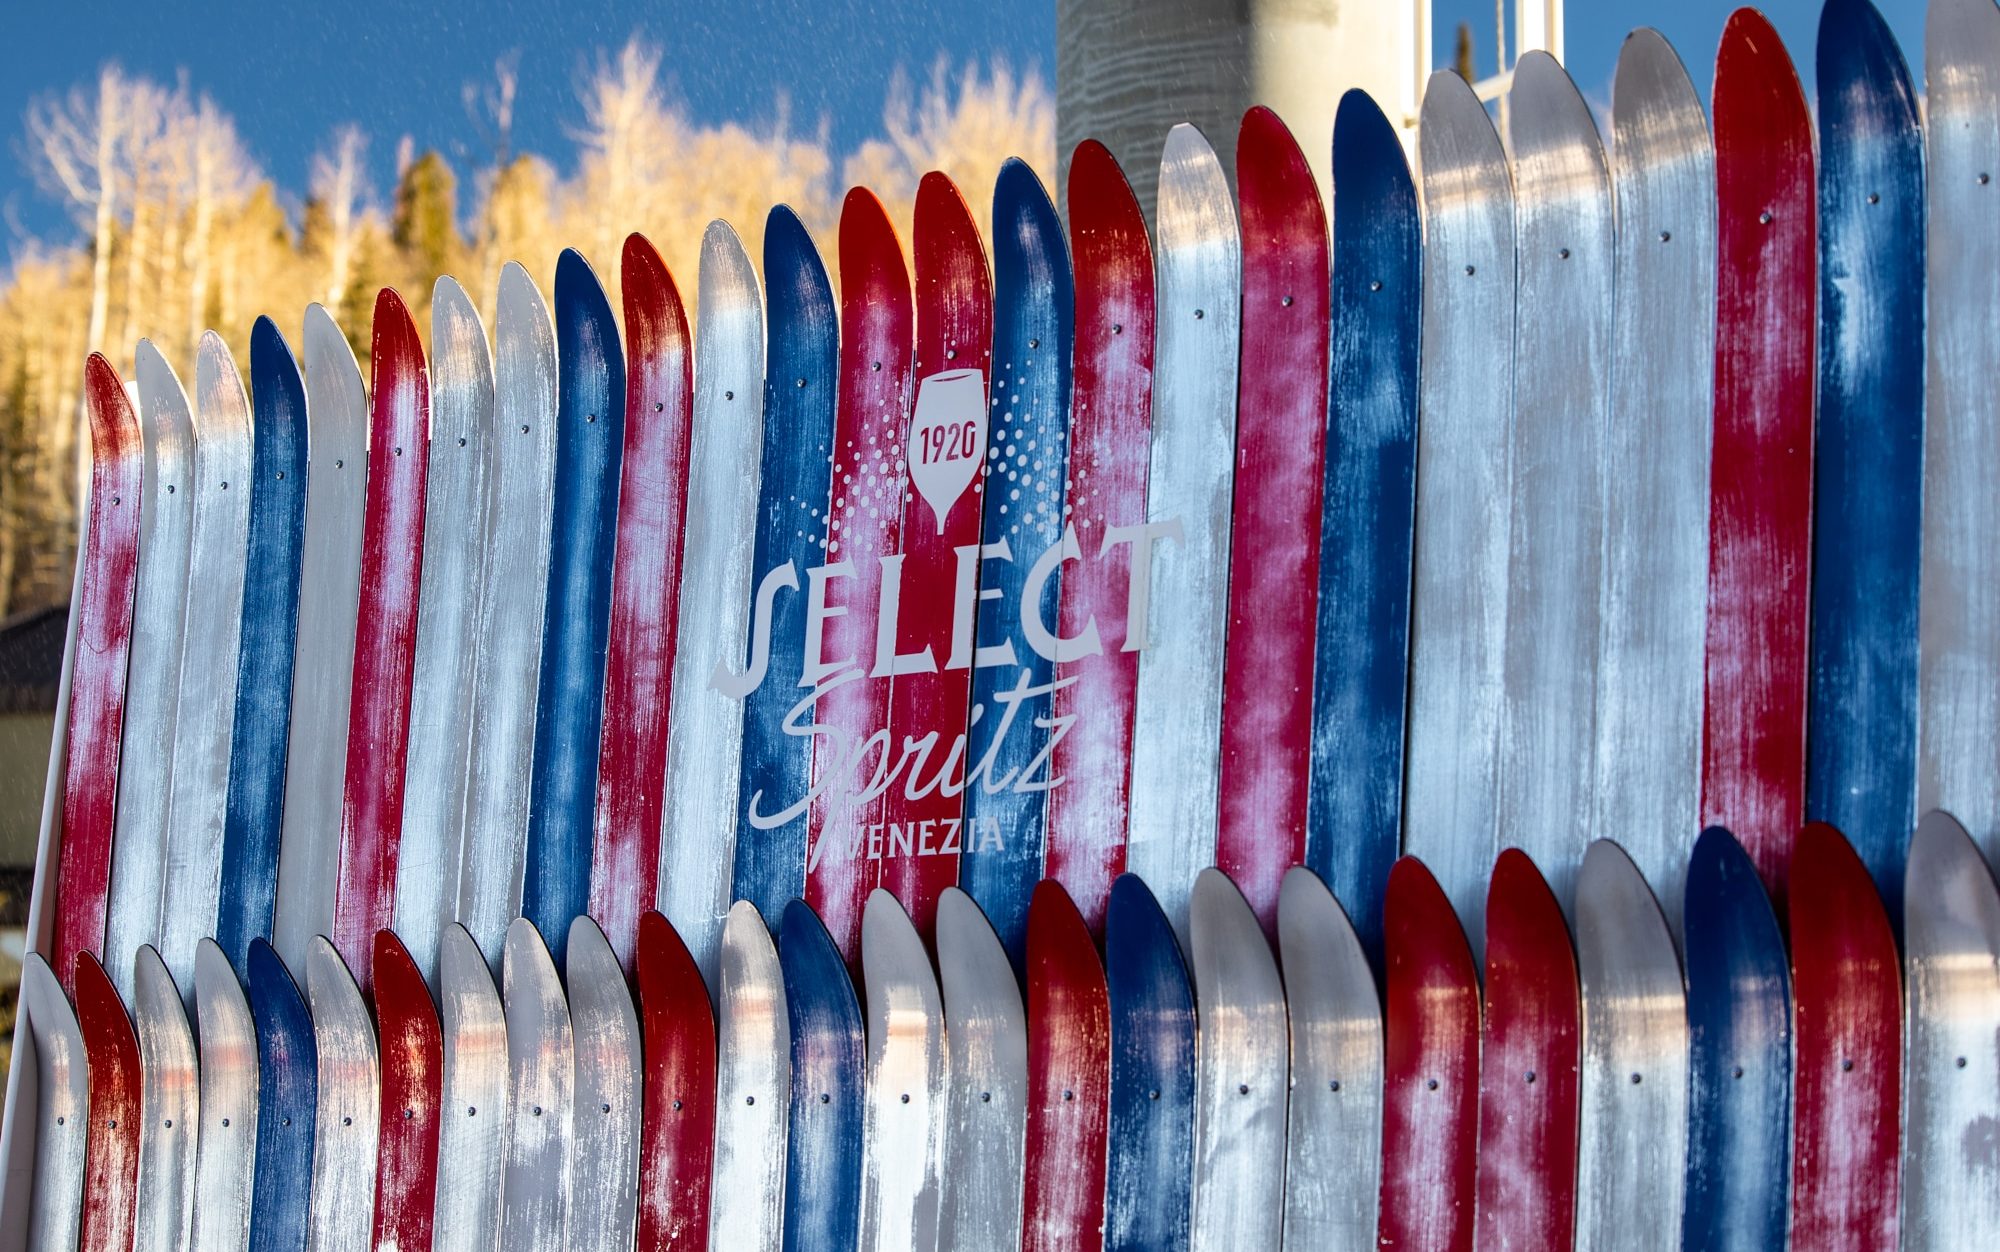 Red, white, and blue skis forming a sign for Select Aperitivo Spritz.